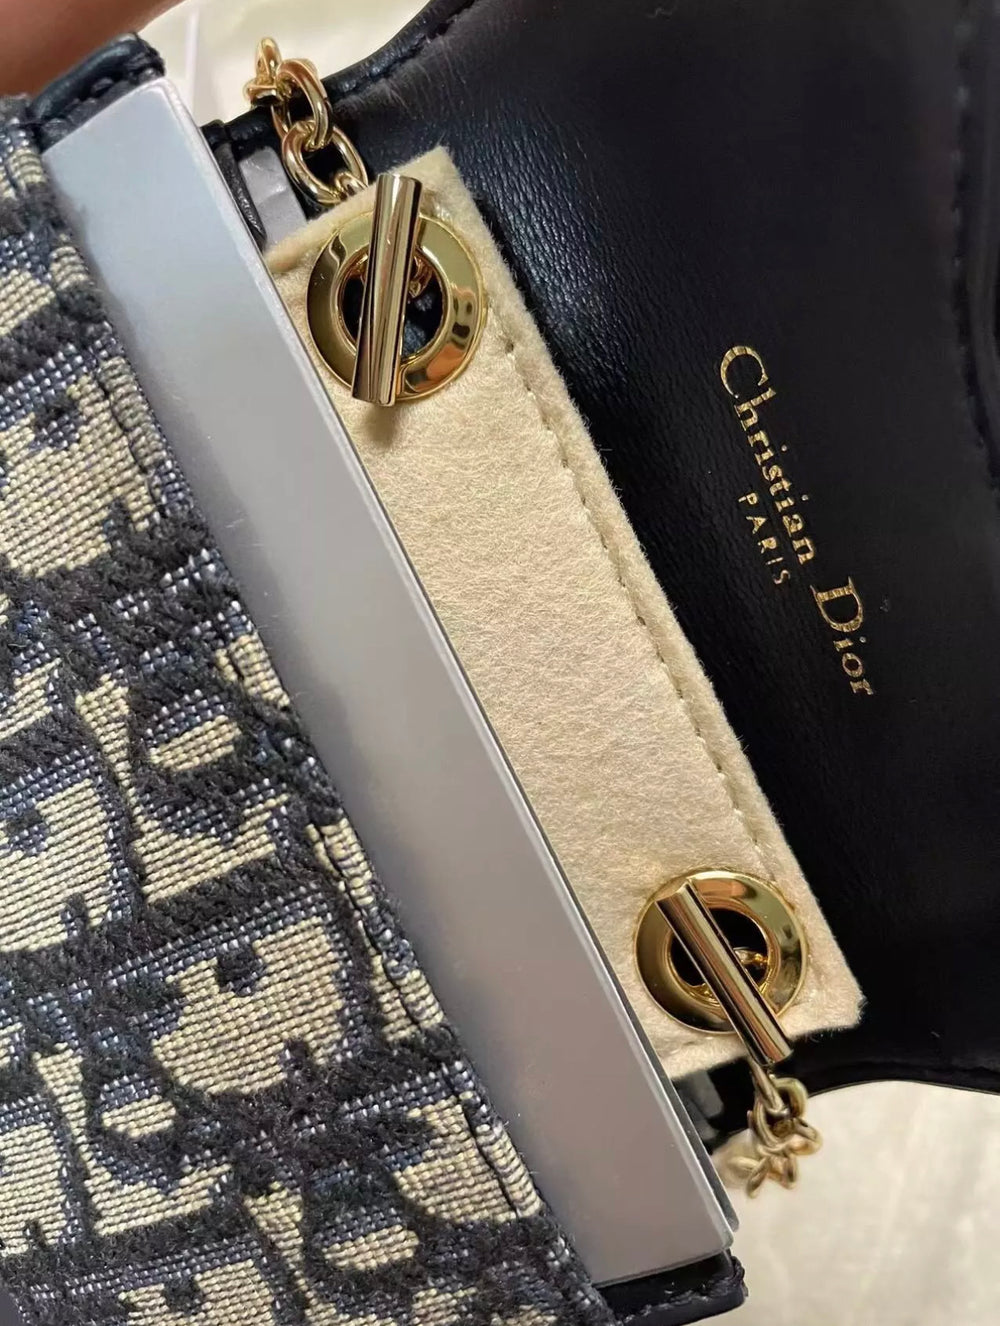 Yasmine G. review of Converter Kit for Dior Card Holder